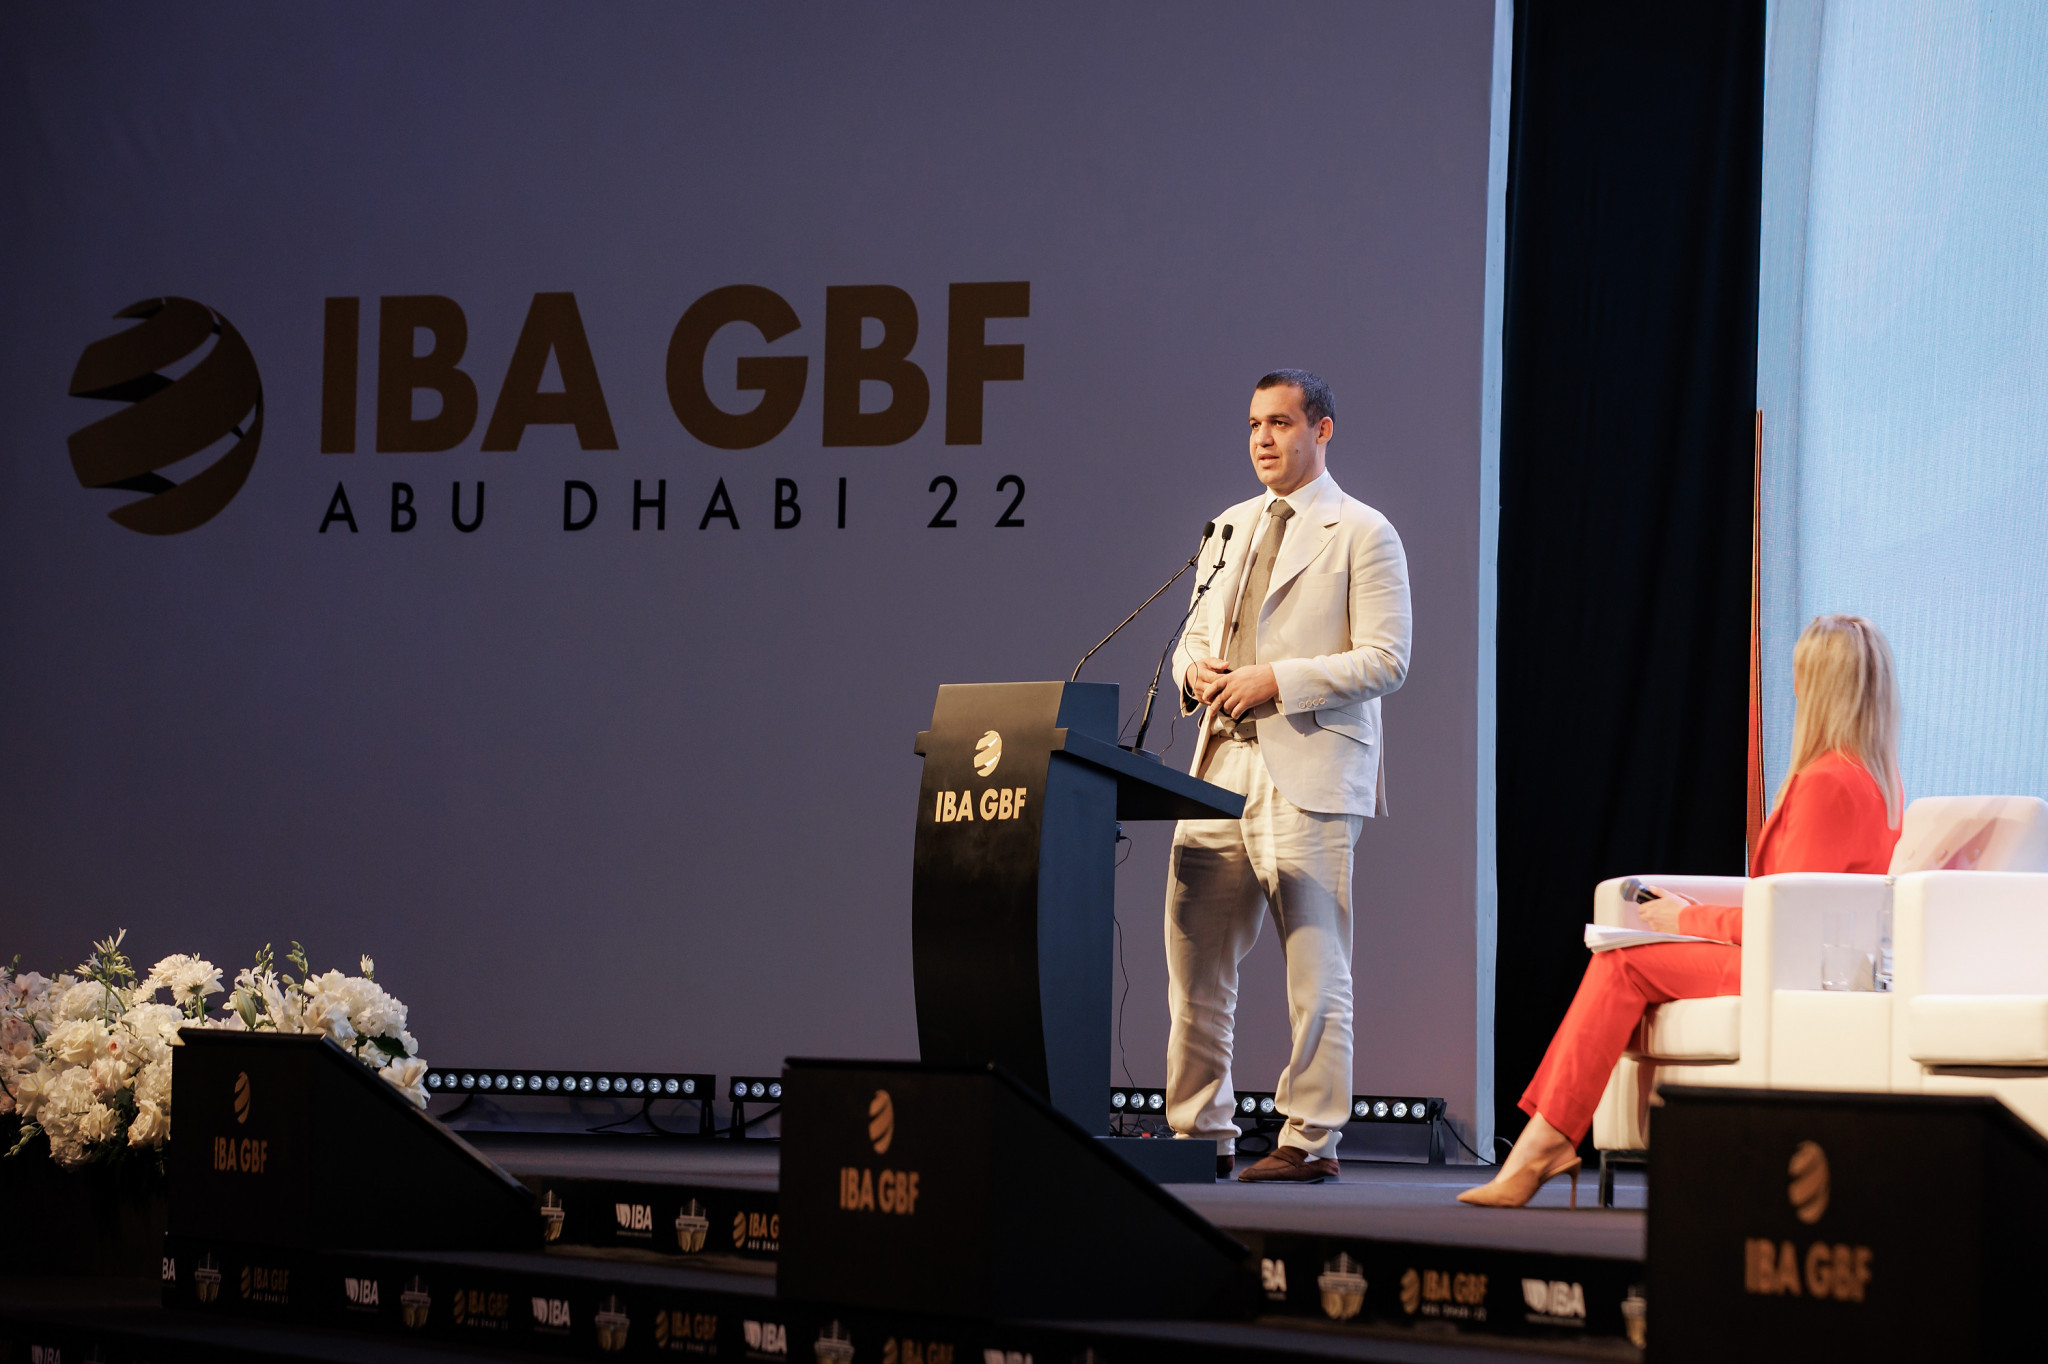 International Boxing Association President Umar Kremlev began the Global Boxing Forum in Abu Dhabi with a thanks to the host country, the United Arab Emirates ©IBA